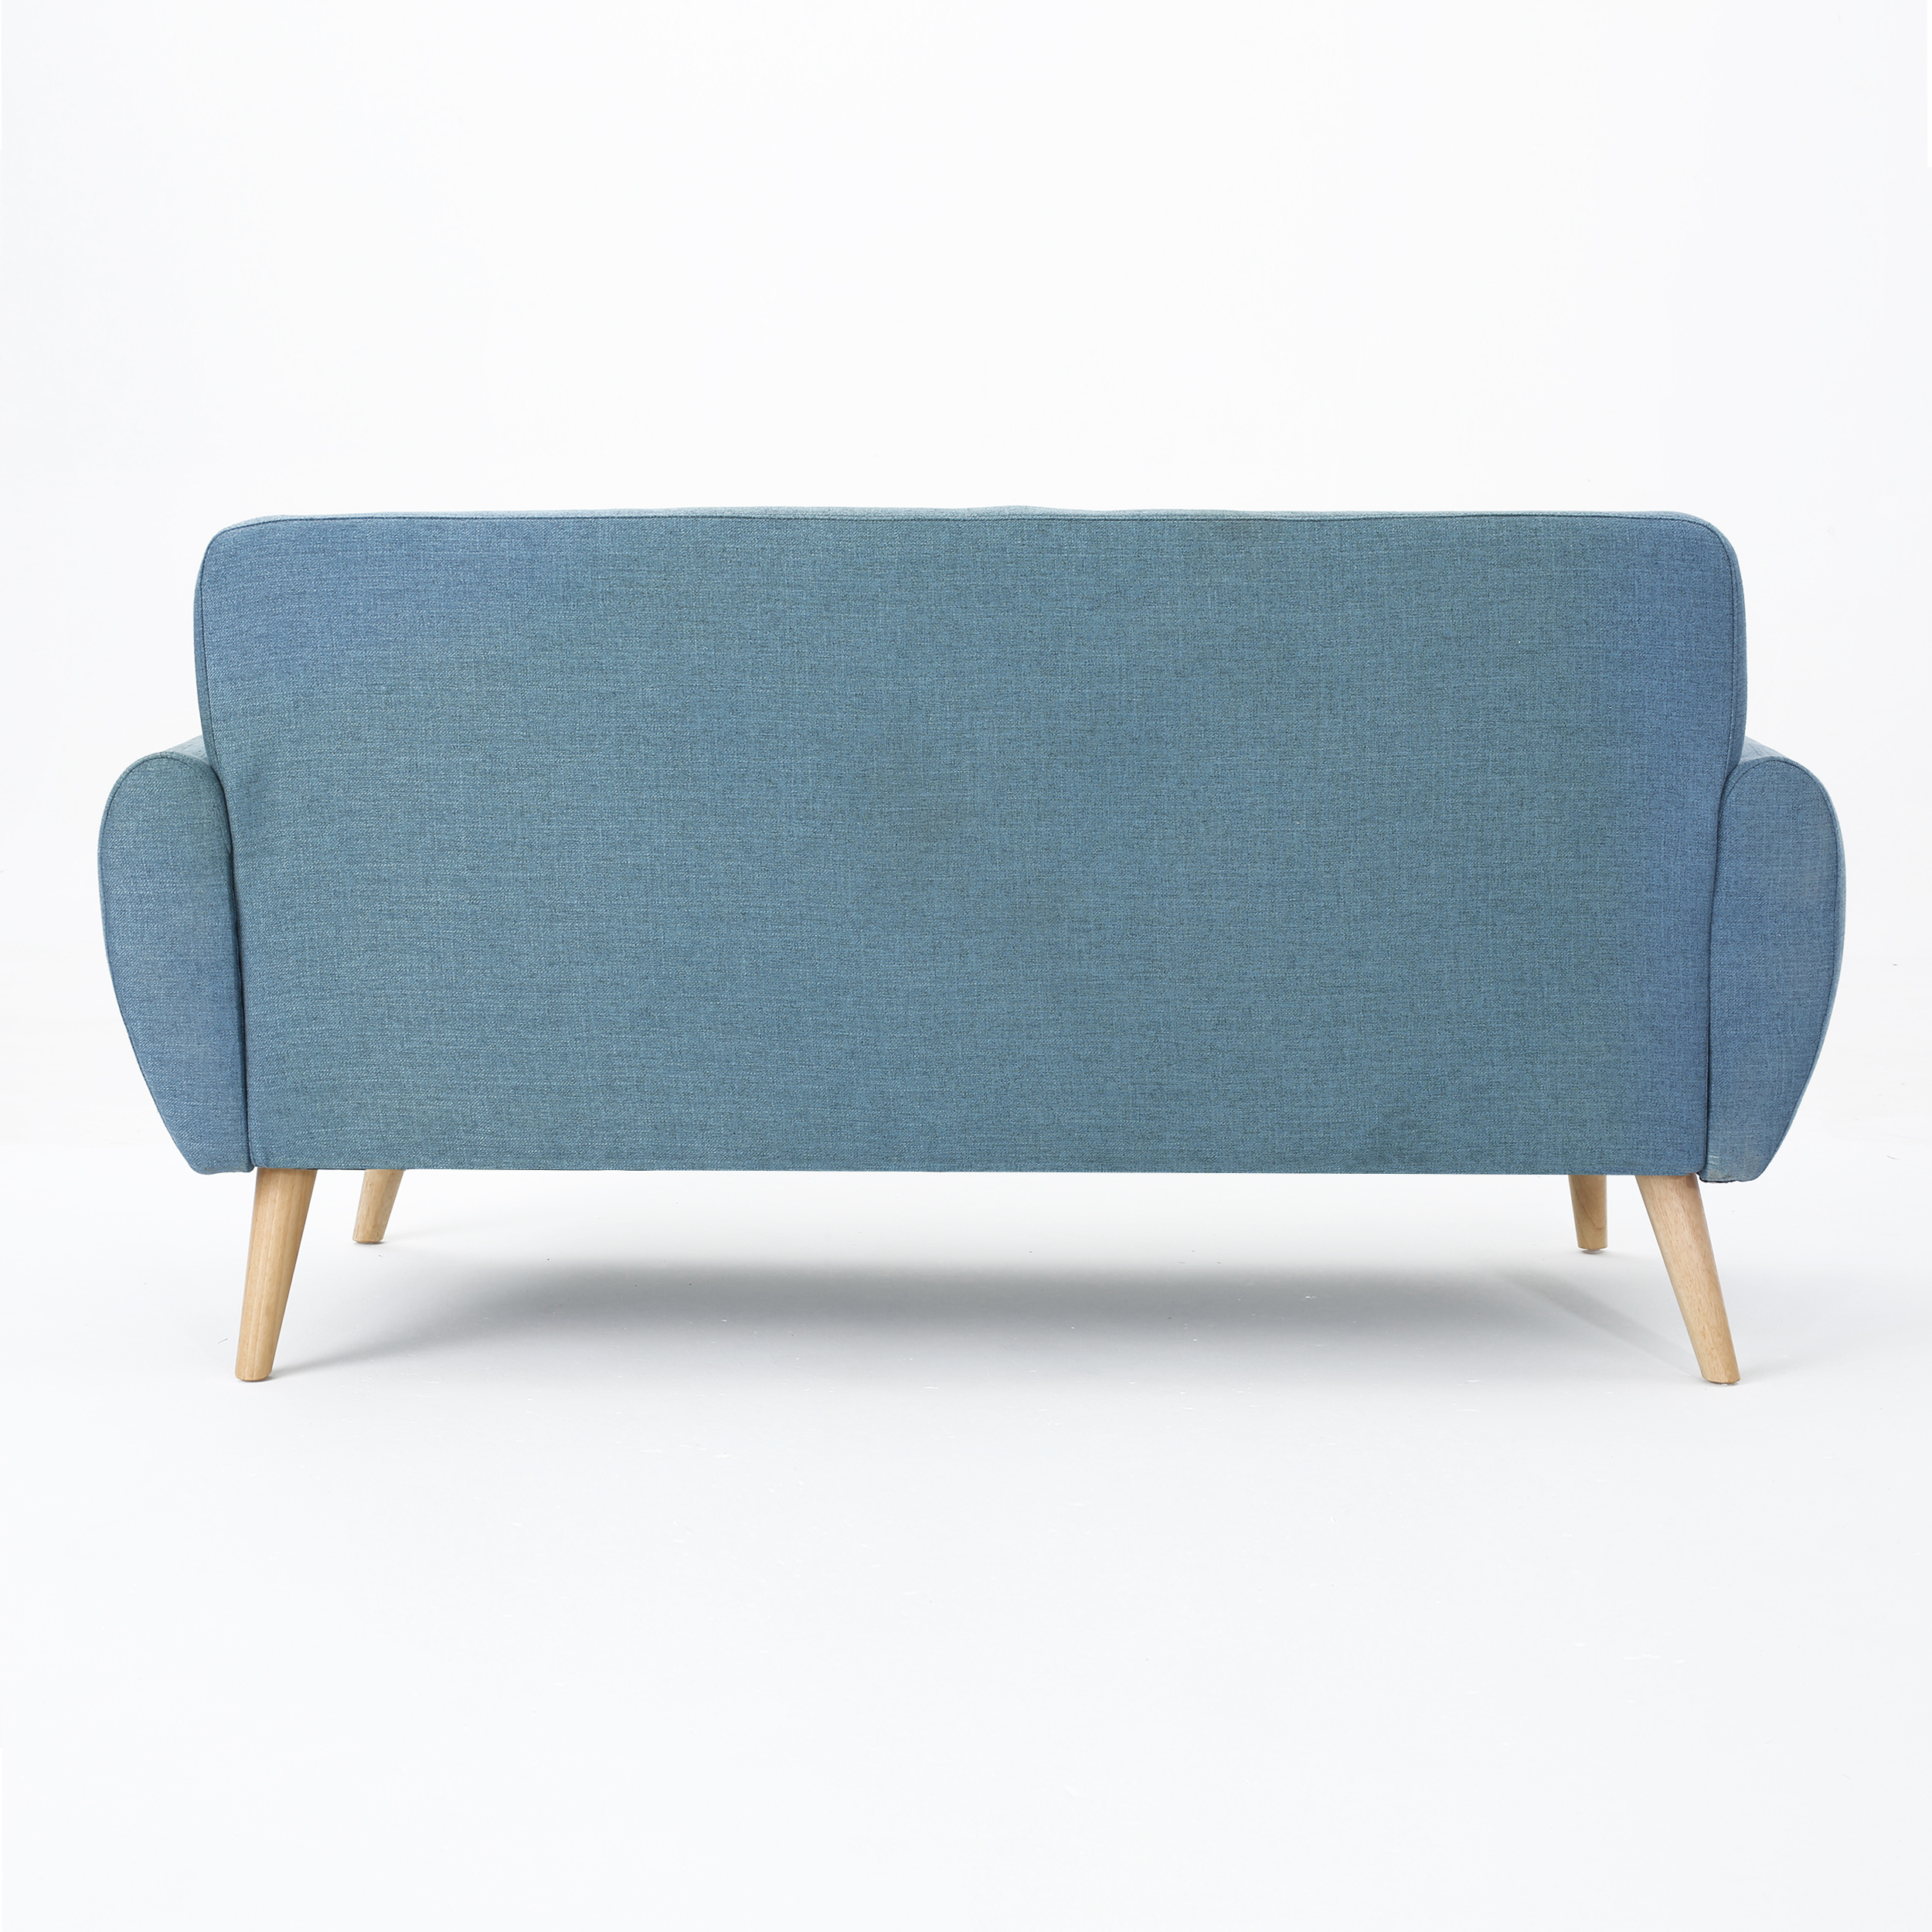 GDF Studio Alscot Mid Century Modern Fabric Tufted Oversized Loveseat, Blue and Natural - image 5 of 8